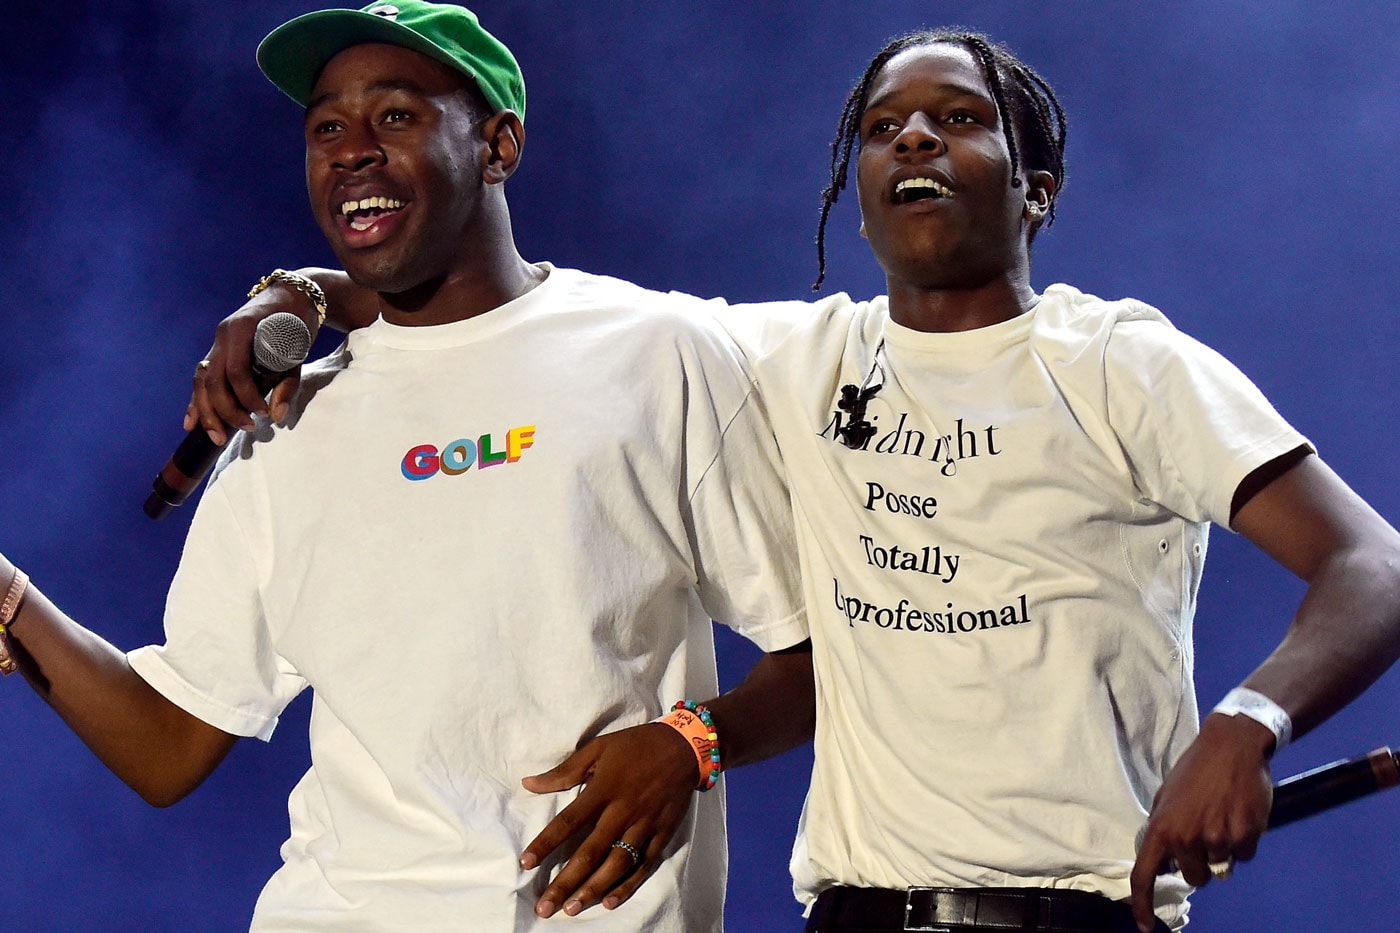 Tyler, The Creator ASAP Rocky Sneakers diss video